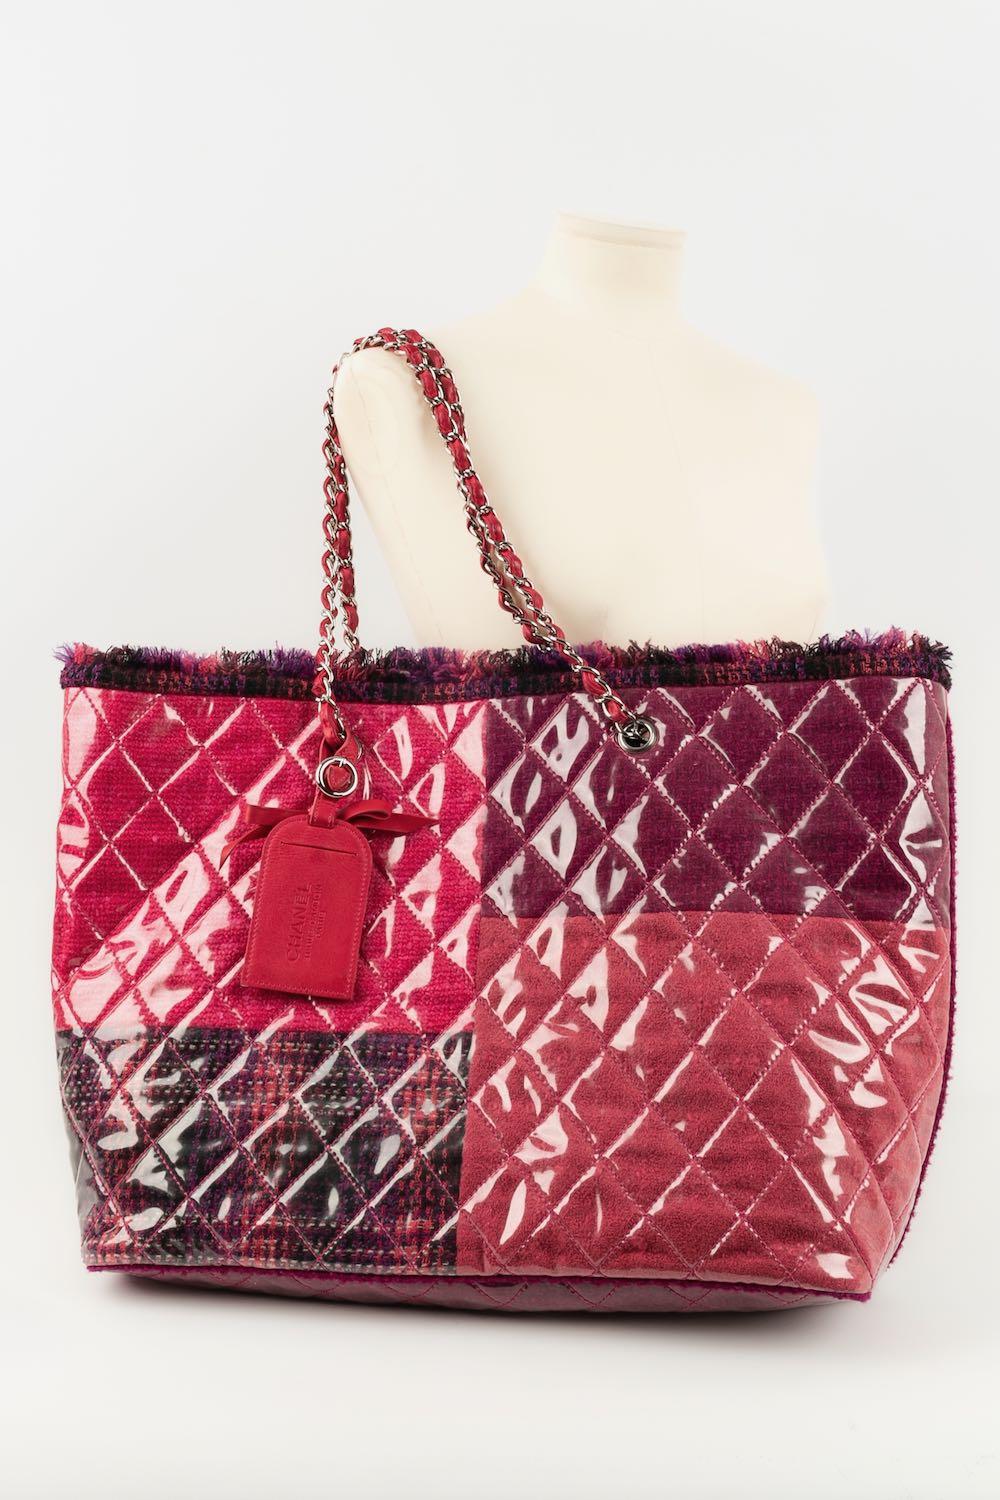 Chanel Quilted Tote Bag in Pink and Purple, 2009/2010 For Sale 8